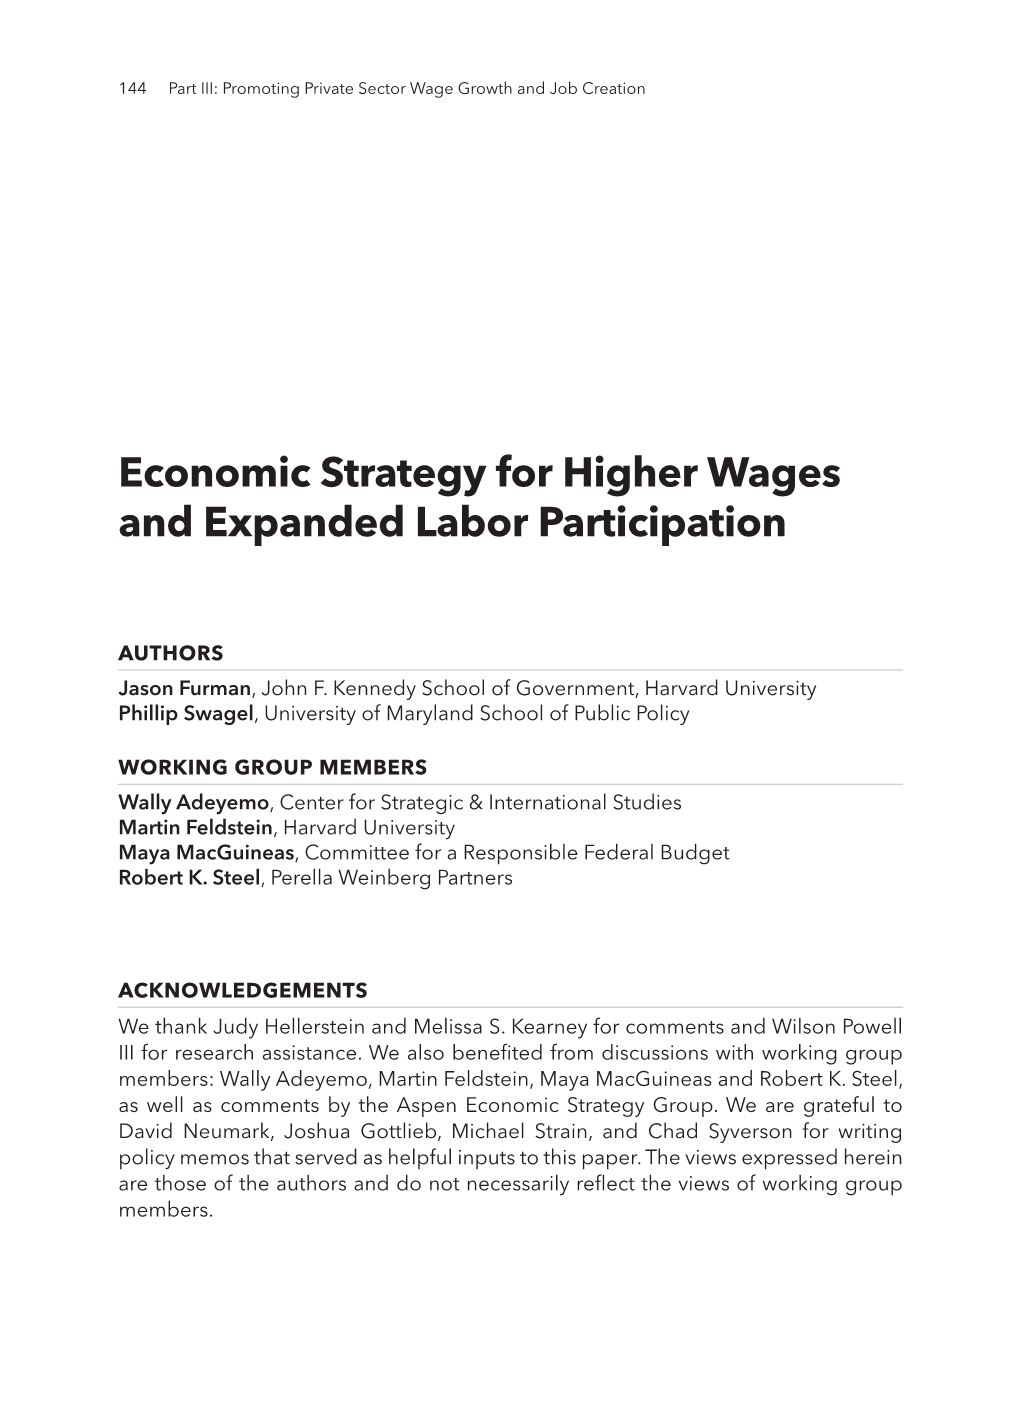 Economic Strategy for Higher Wages and Expanded Labor Participation